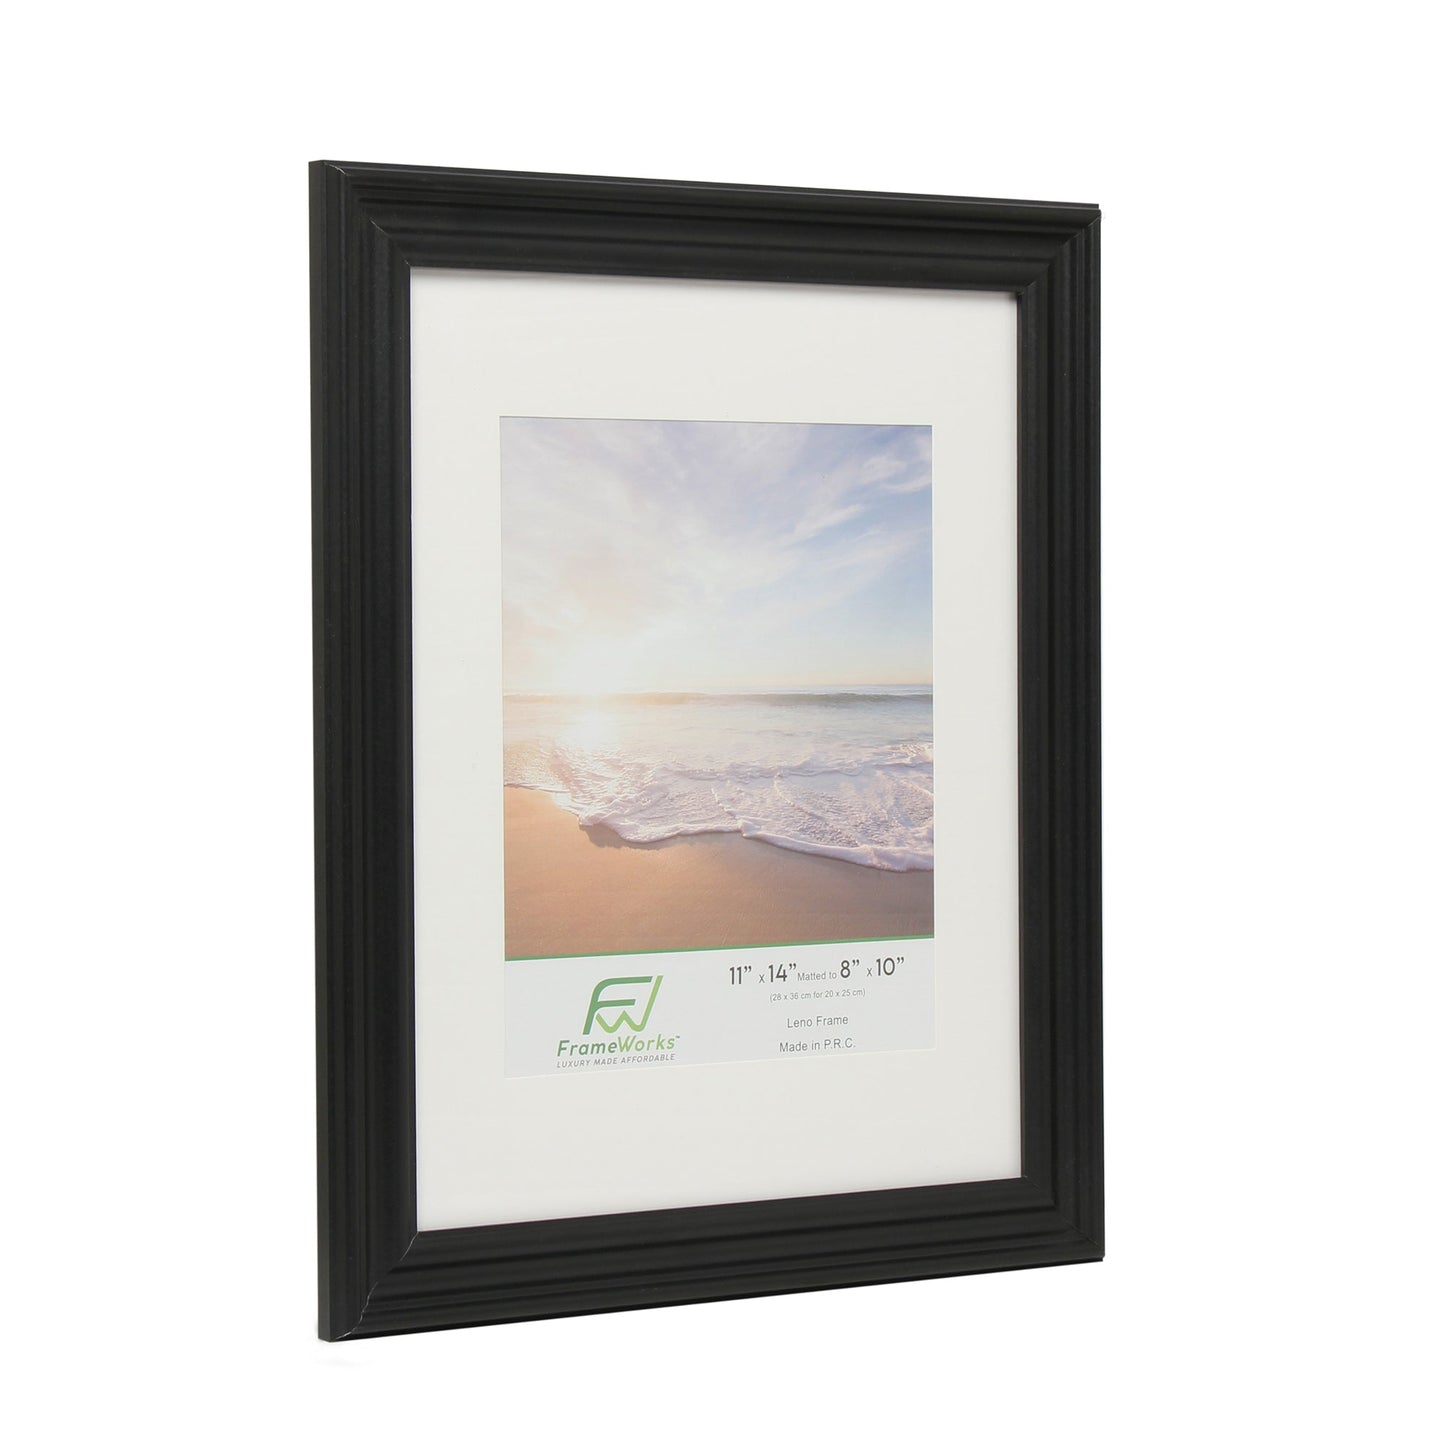 11" x 14" Black Wood 2-Pack Picture Frames with Molded Edges, 8" x 10" Matted